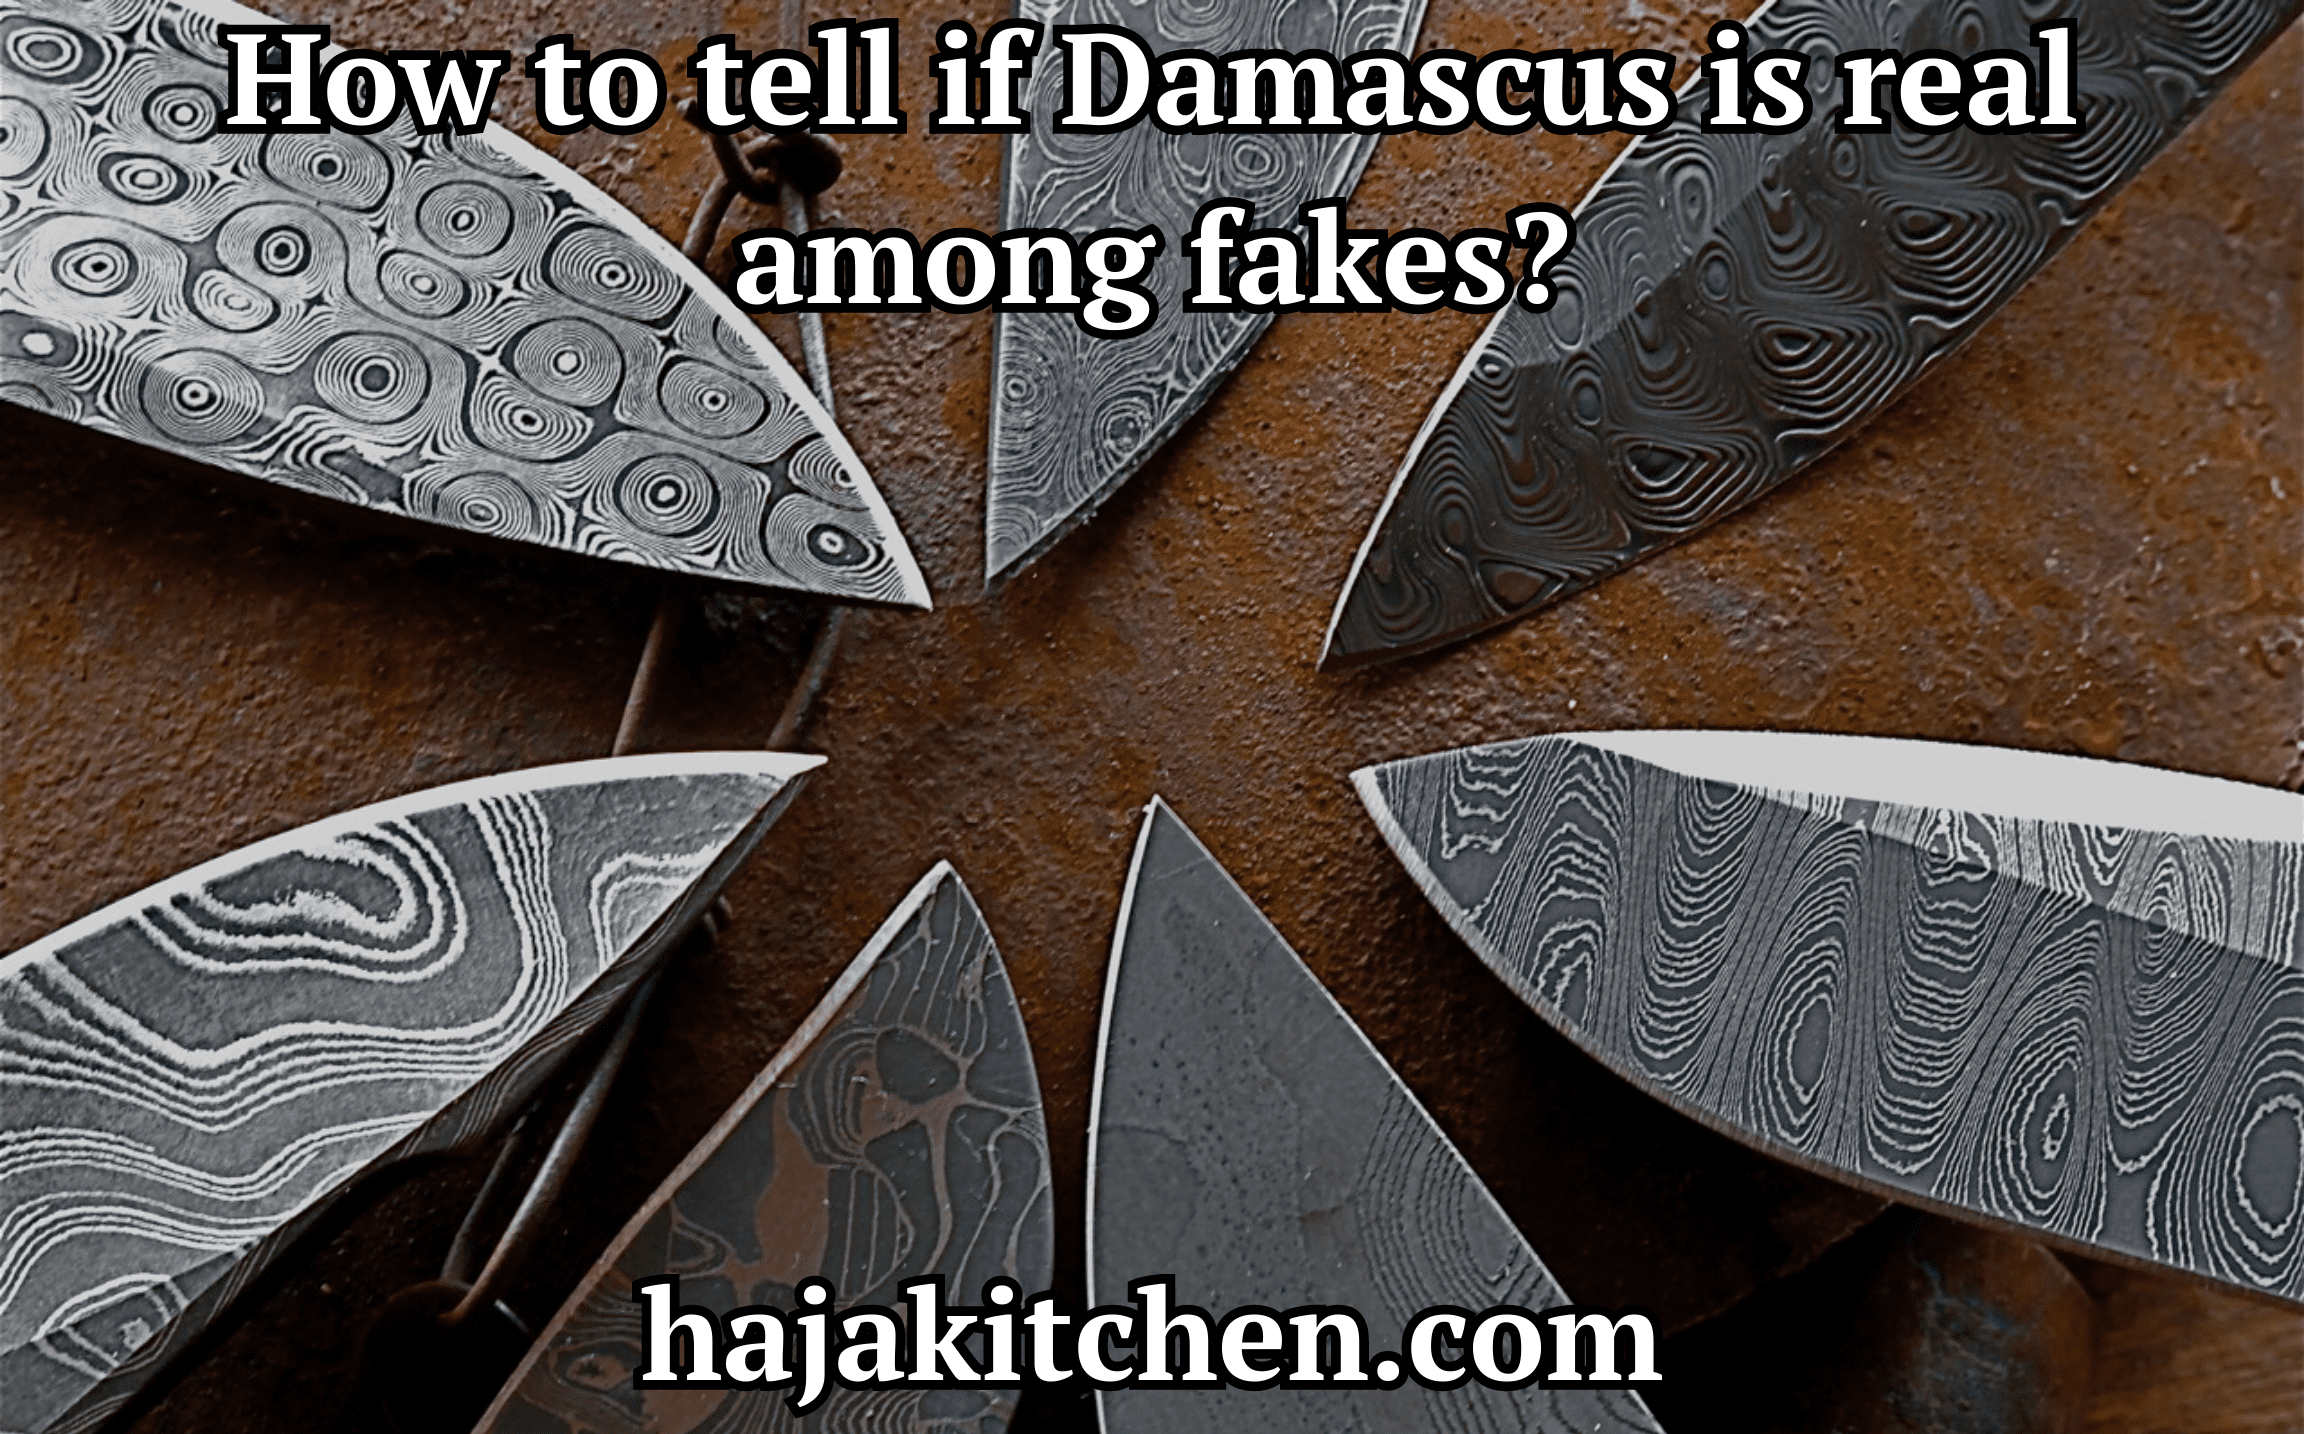 How to tell if Damascus is real among fakes (1) (1)